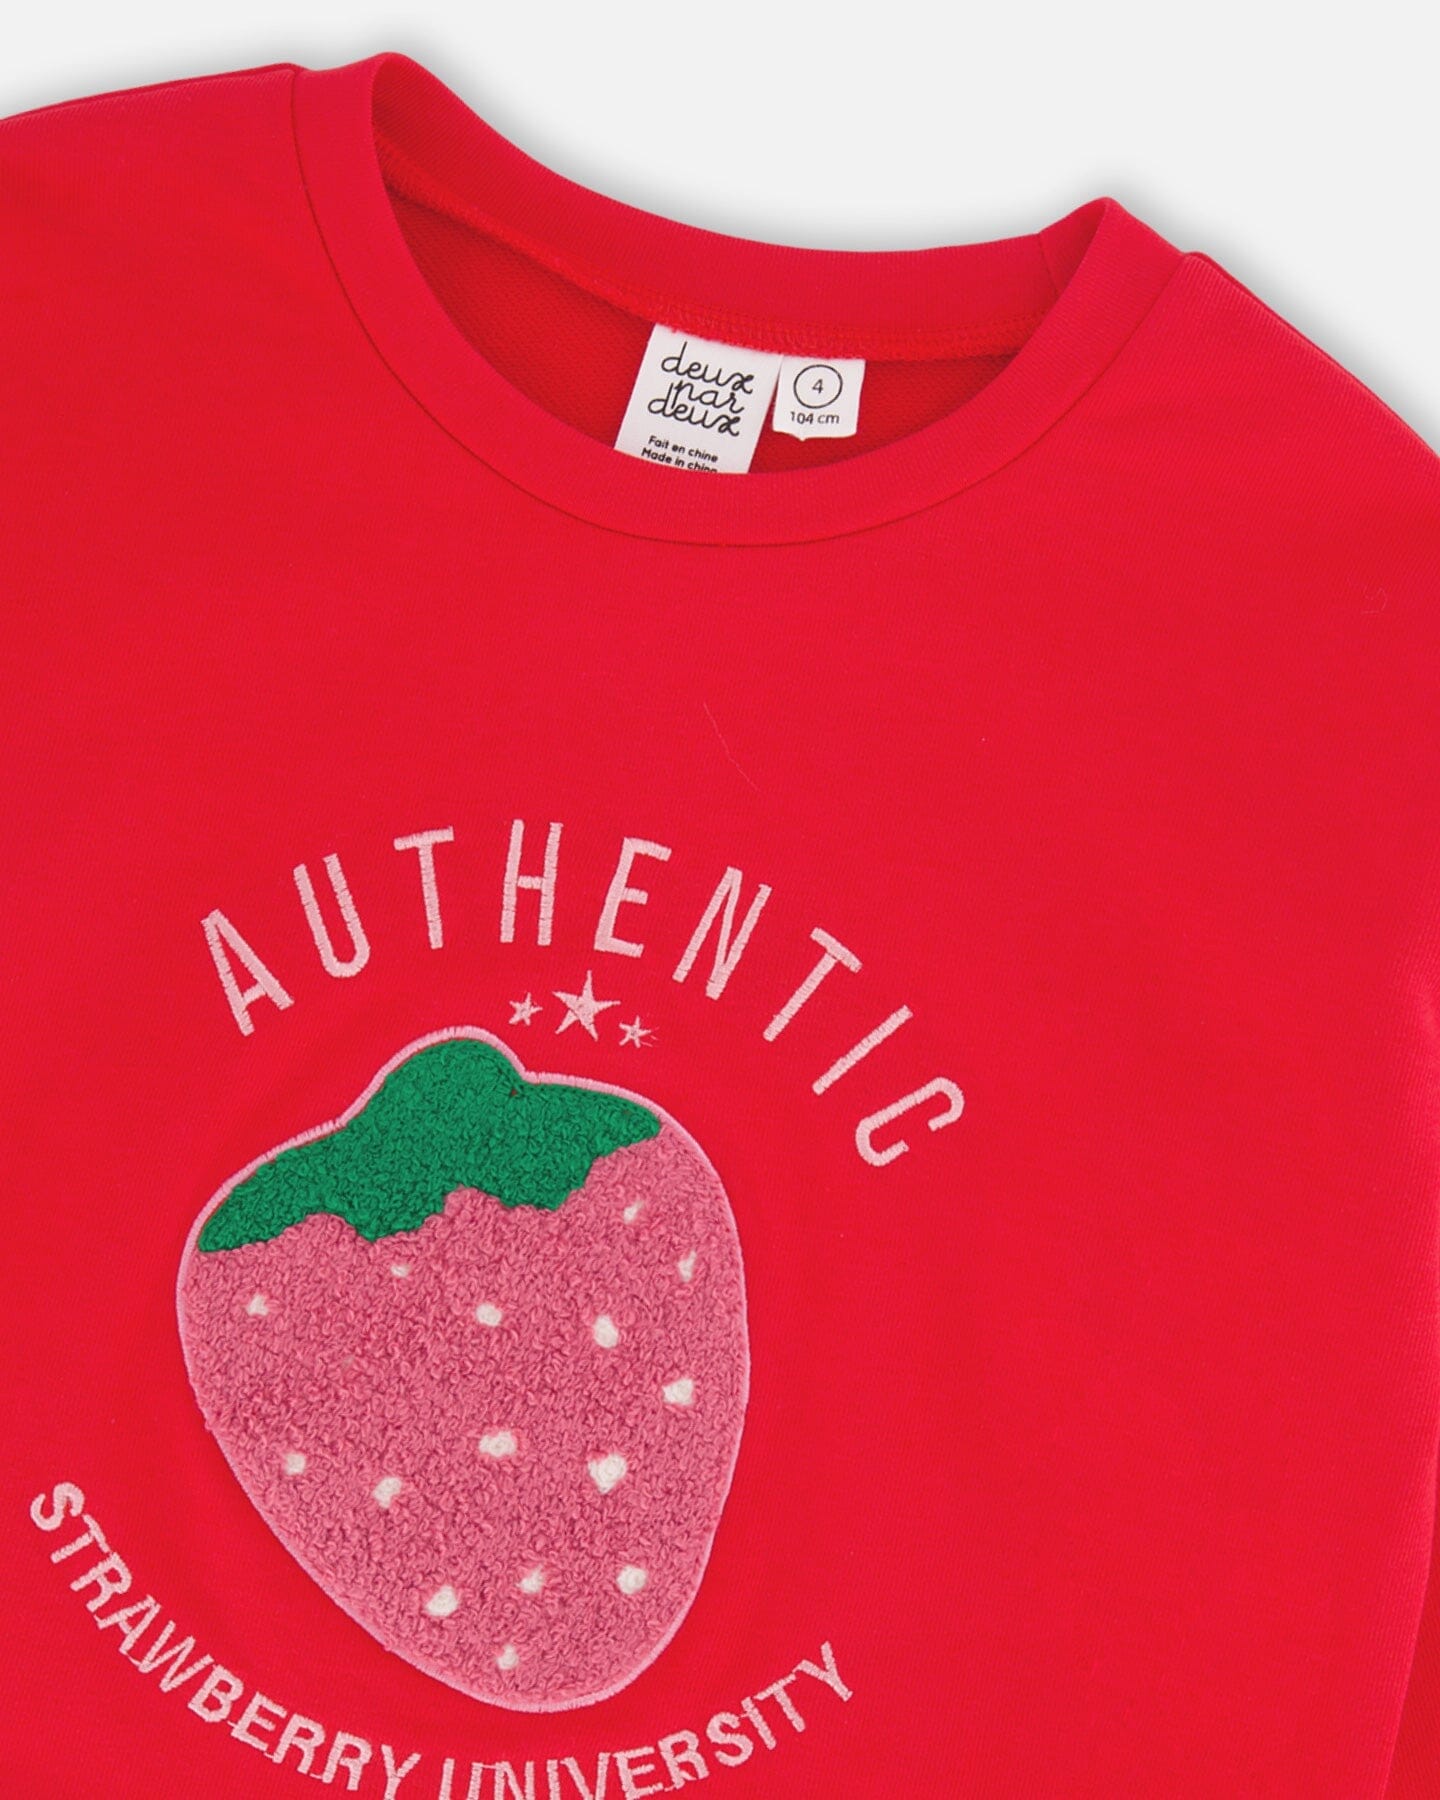 French Terry Sweatshirt With Strawberry Applique True Red - F30K30_732